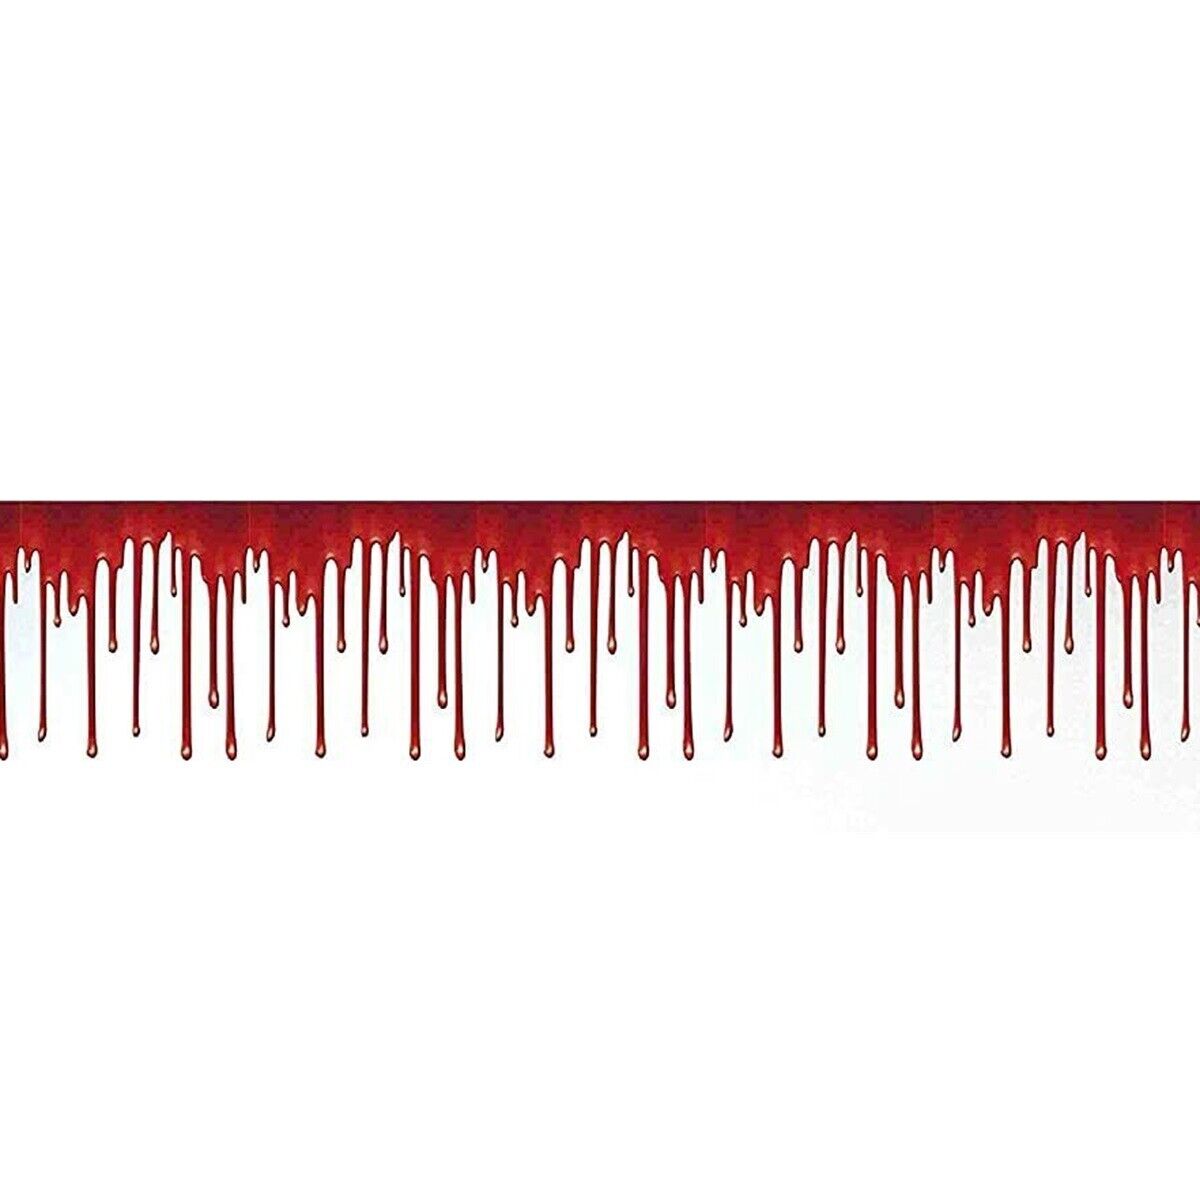 Horror BLOODY BORDER Scene Wall Trim Halloween Party Decoration Prop-20ft x1.5ft